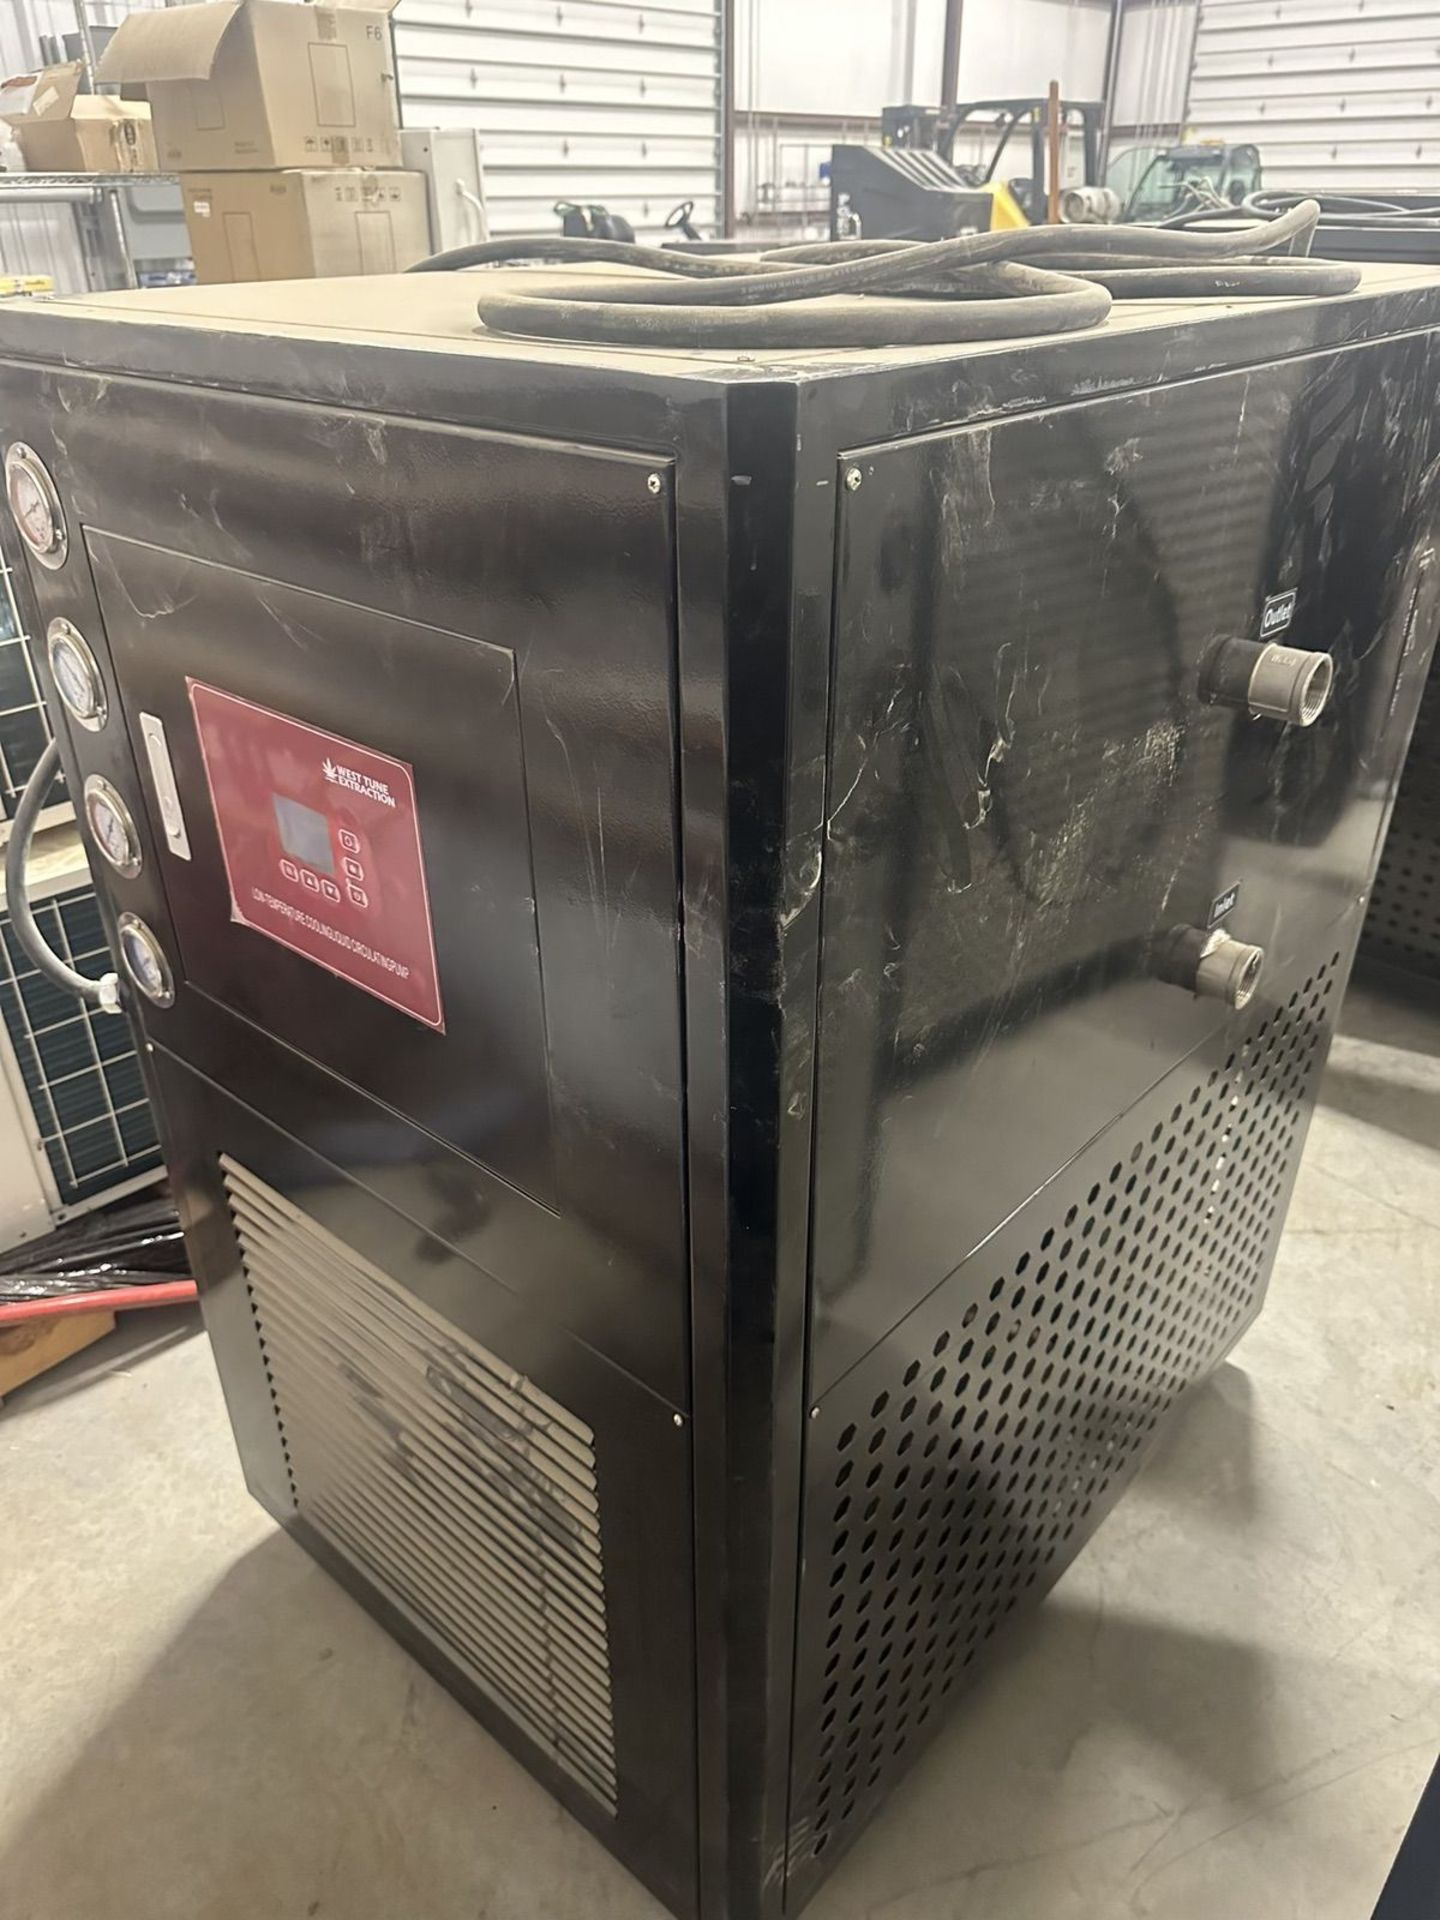 West Tune Extraction Refrigerated Circulator, Model, DLSB-50/80 Year 2019 | Rig Fee $200 - Image 2 of 5